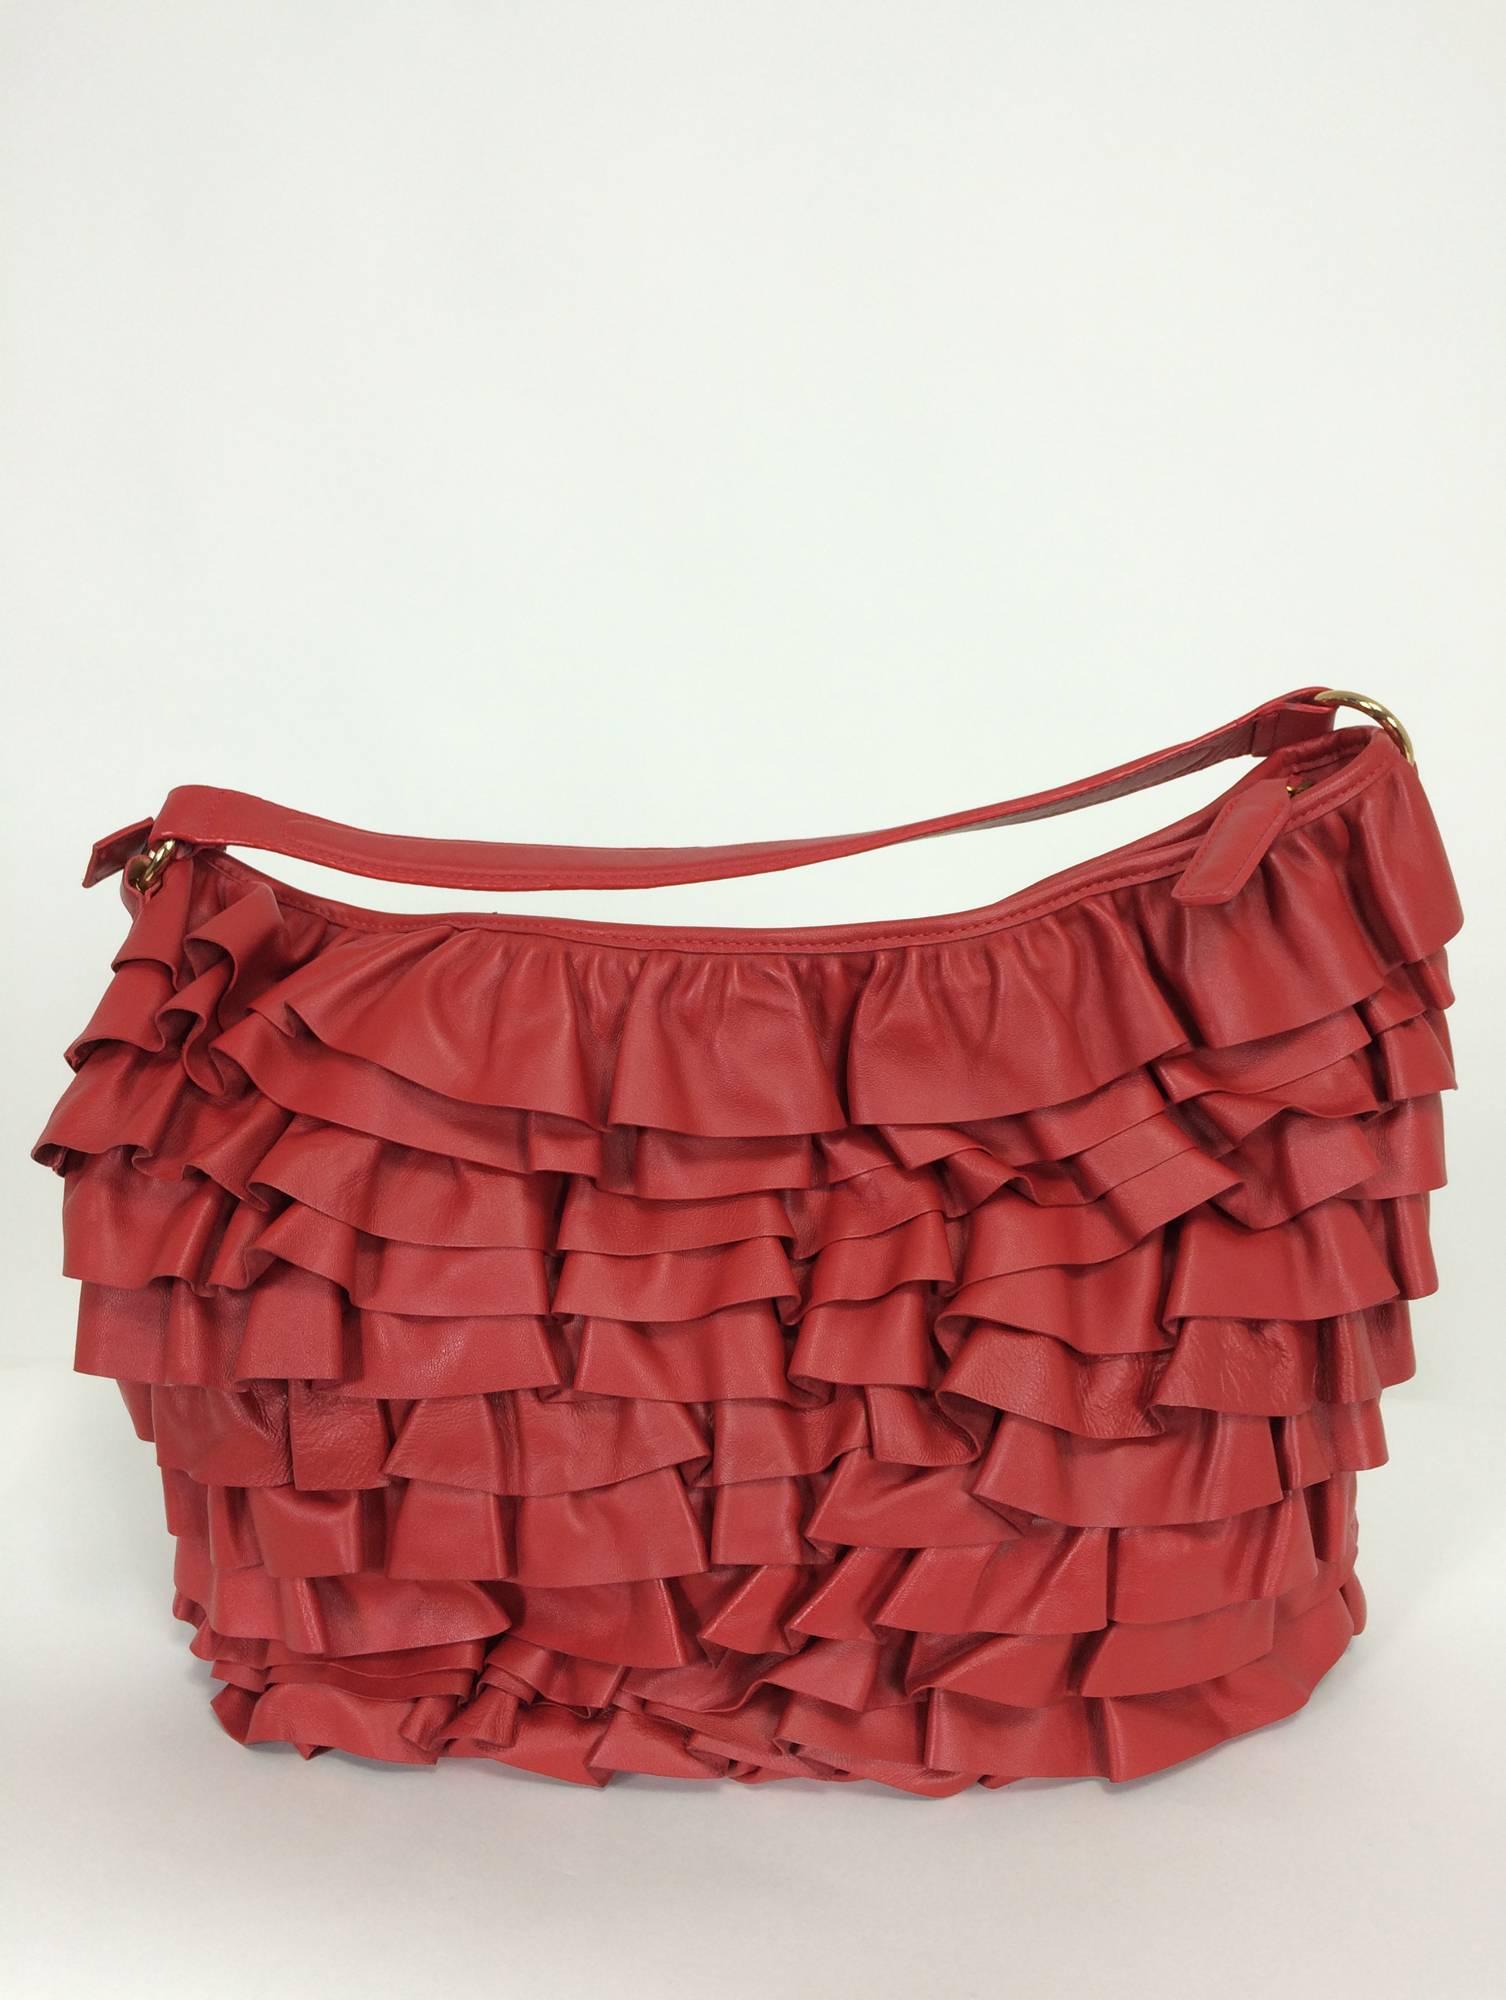 Valentino large red leather ruffle shoulder bag...Padded shoulder strap, gold strap rings, leather tab zipper pull...Deep soft red leather ruffles all around the bag...Gold metal logo plate at the lower front of the bag...The lining is silvery satin